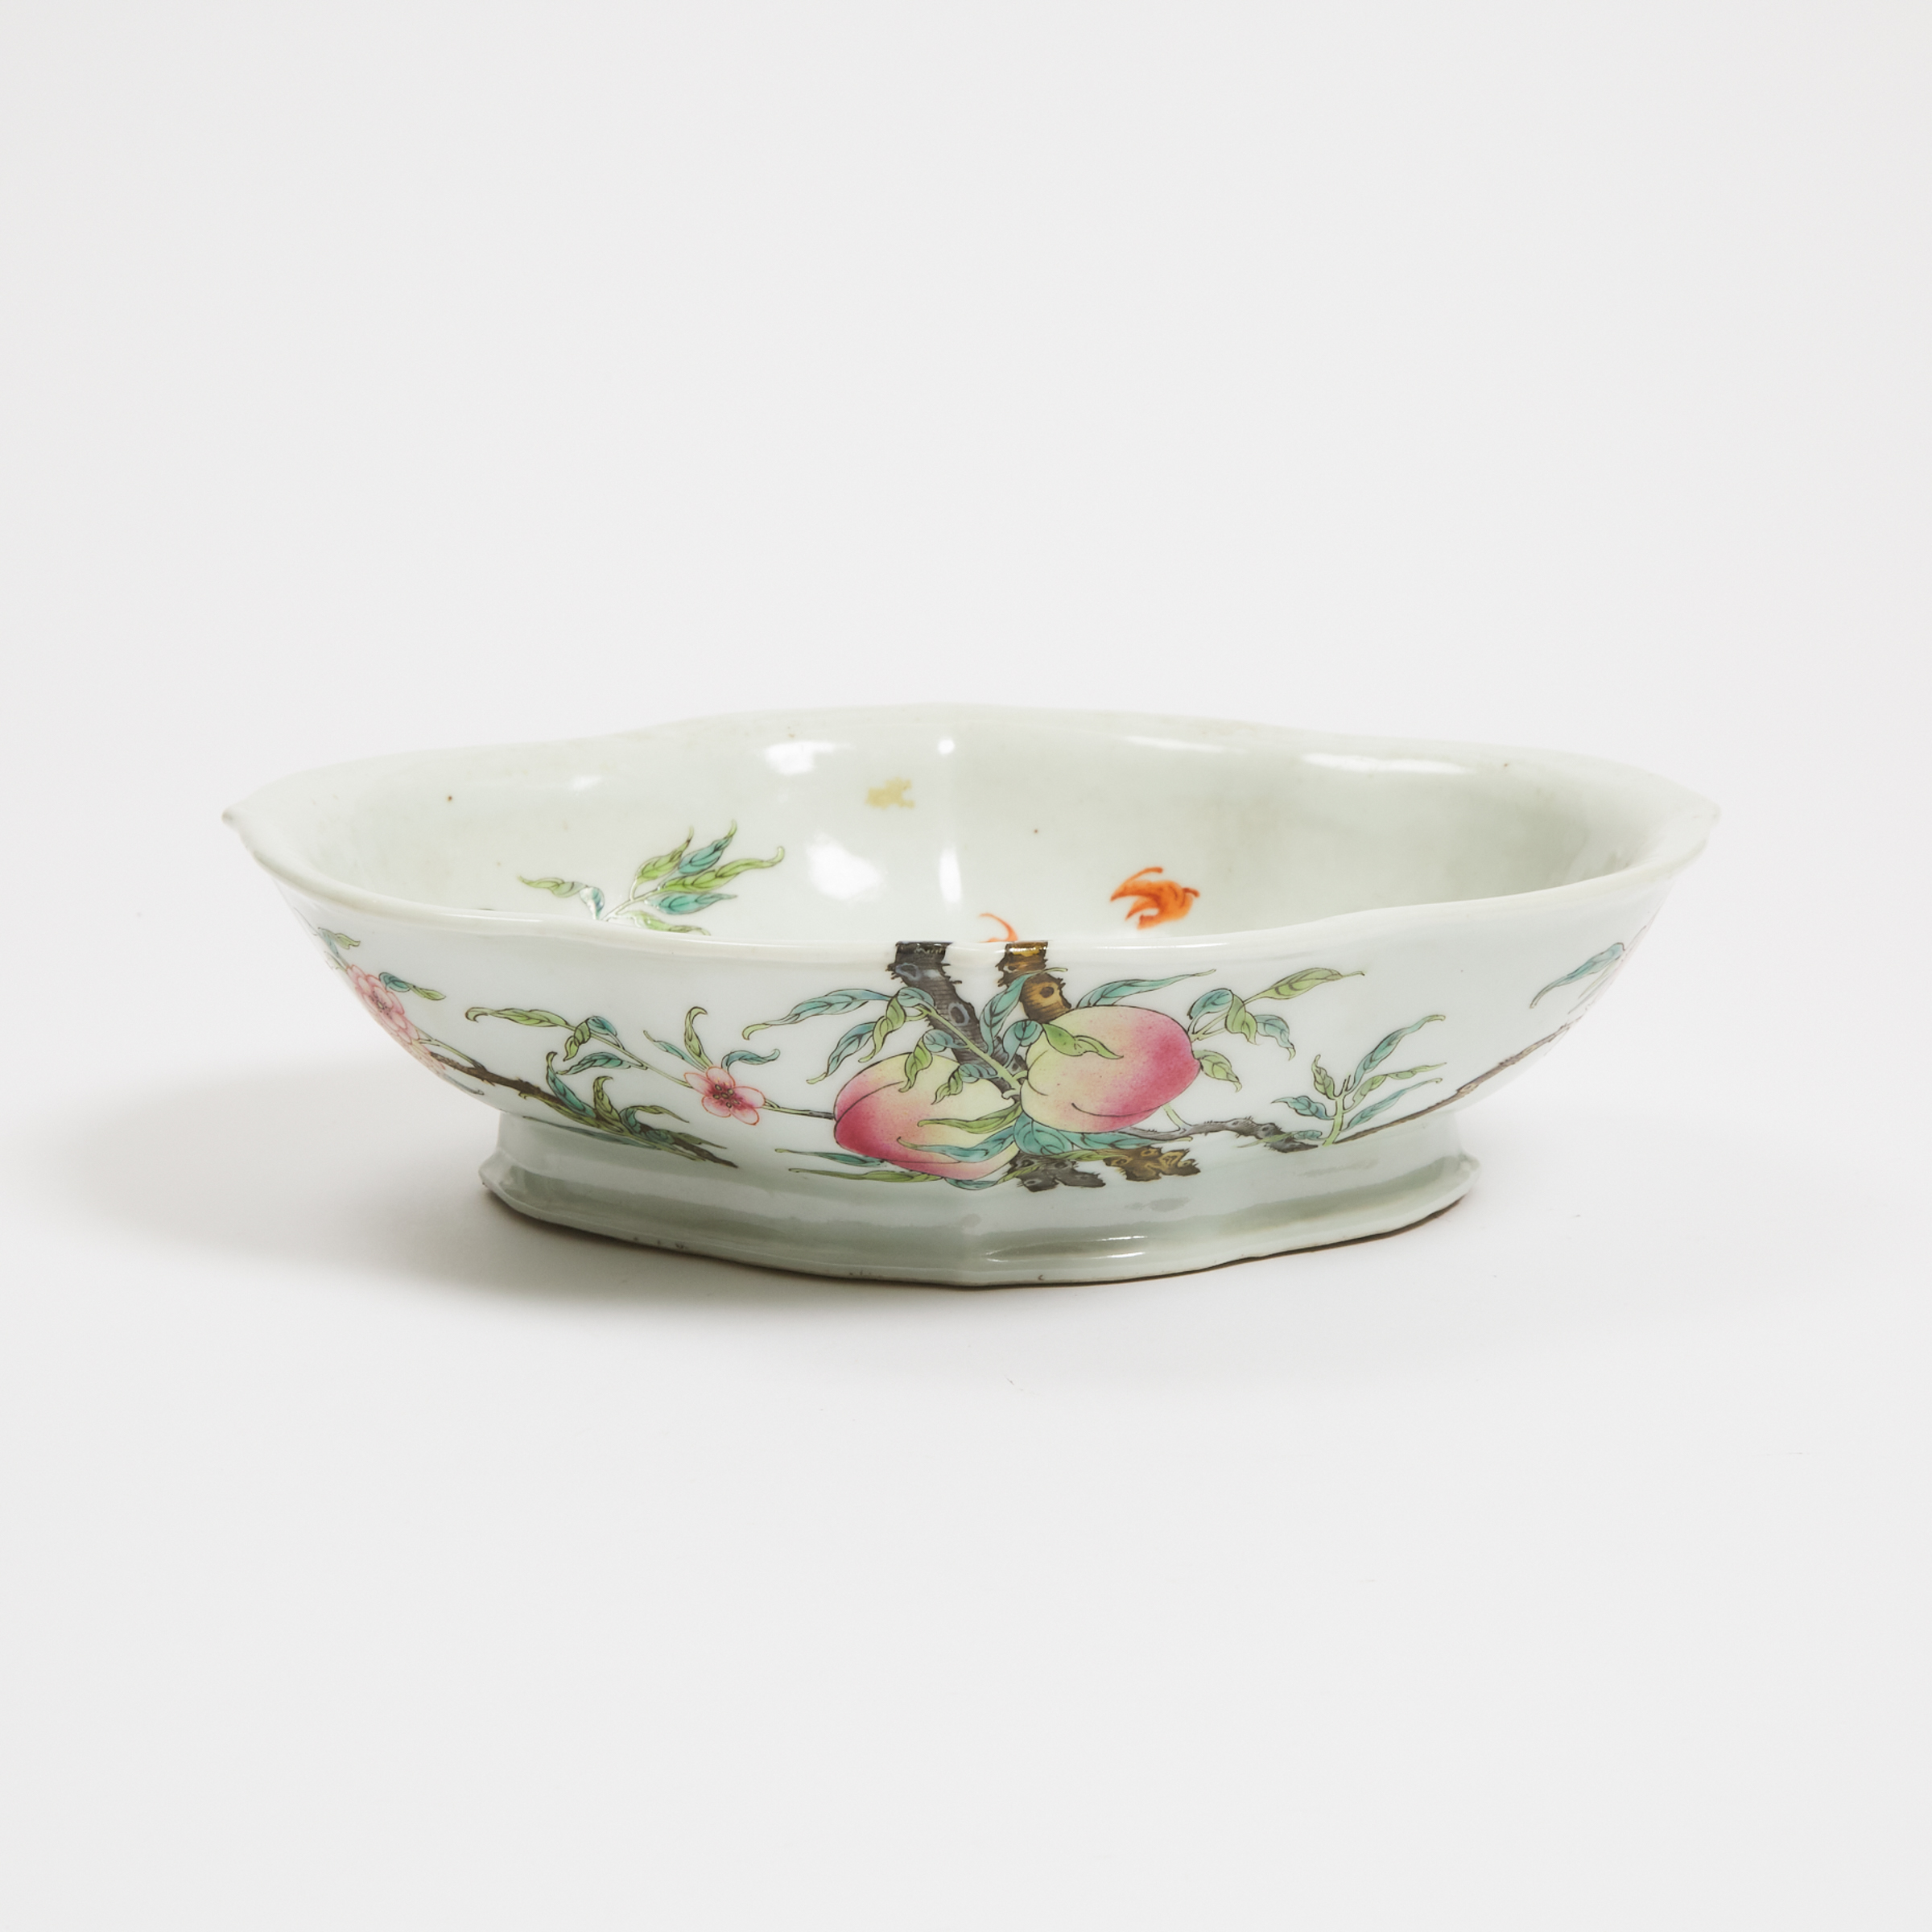 A Famille Rose 'Nine Peaches' Footed Dish, Dun Ben Tang Mark, Late 19th/Early 20th Century